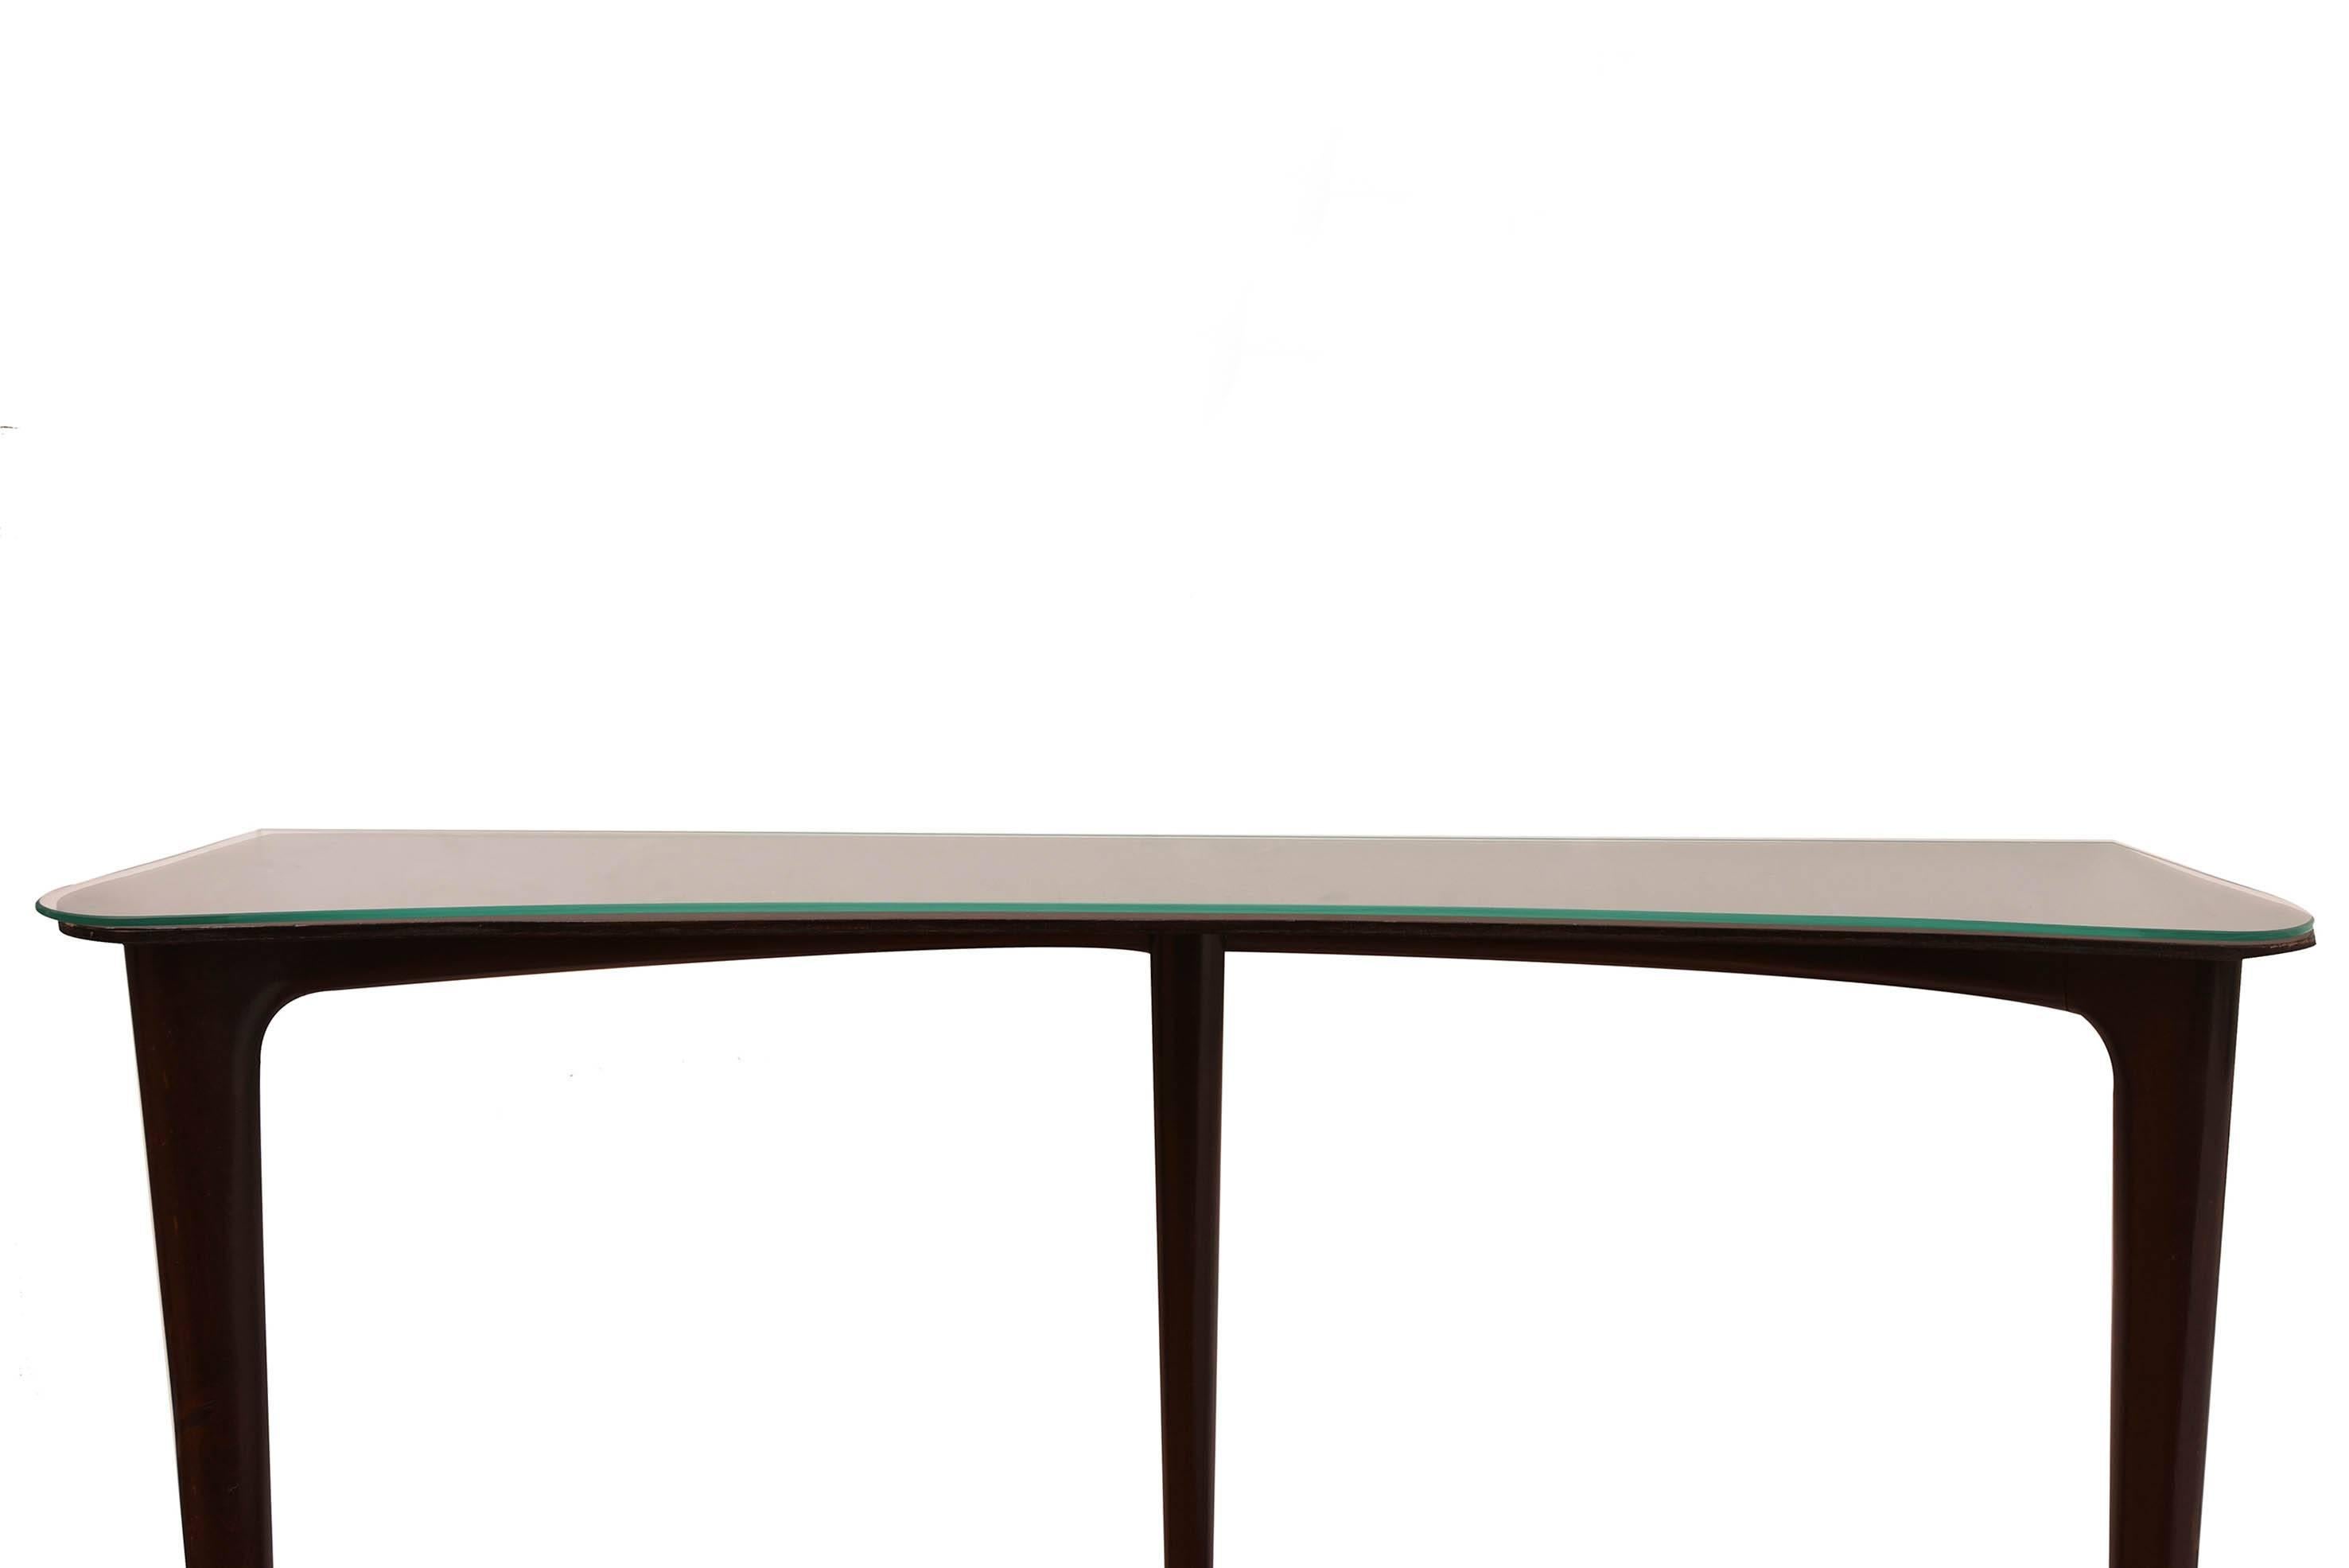 Minotti Production 1940s Console In Excellent Condition For Sale In Milan, IT